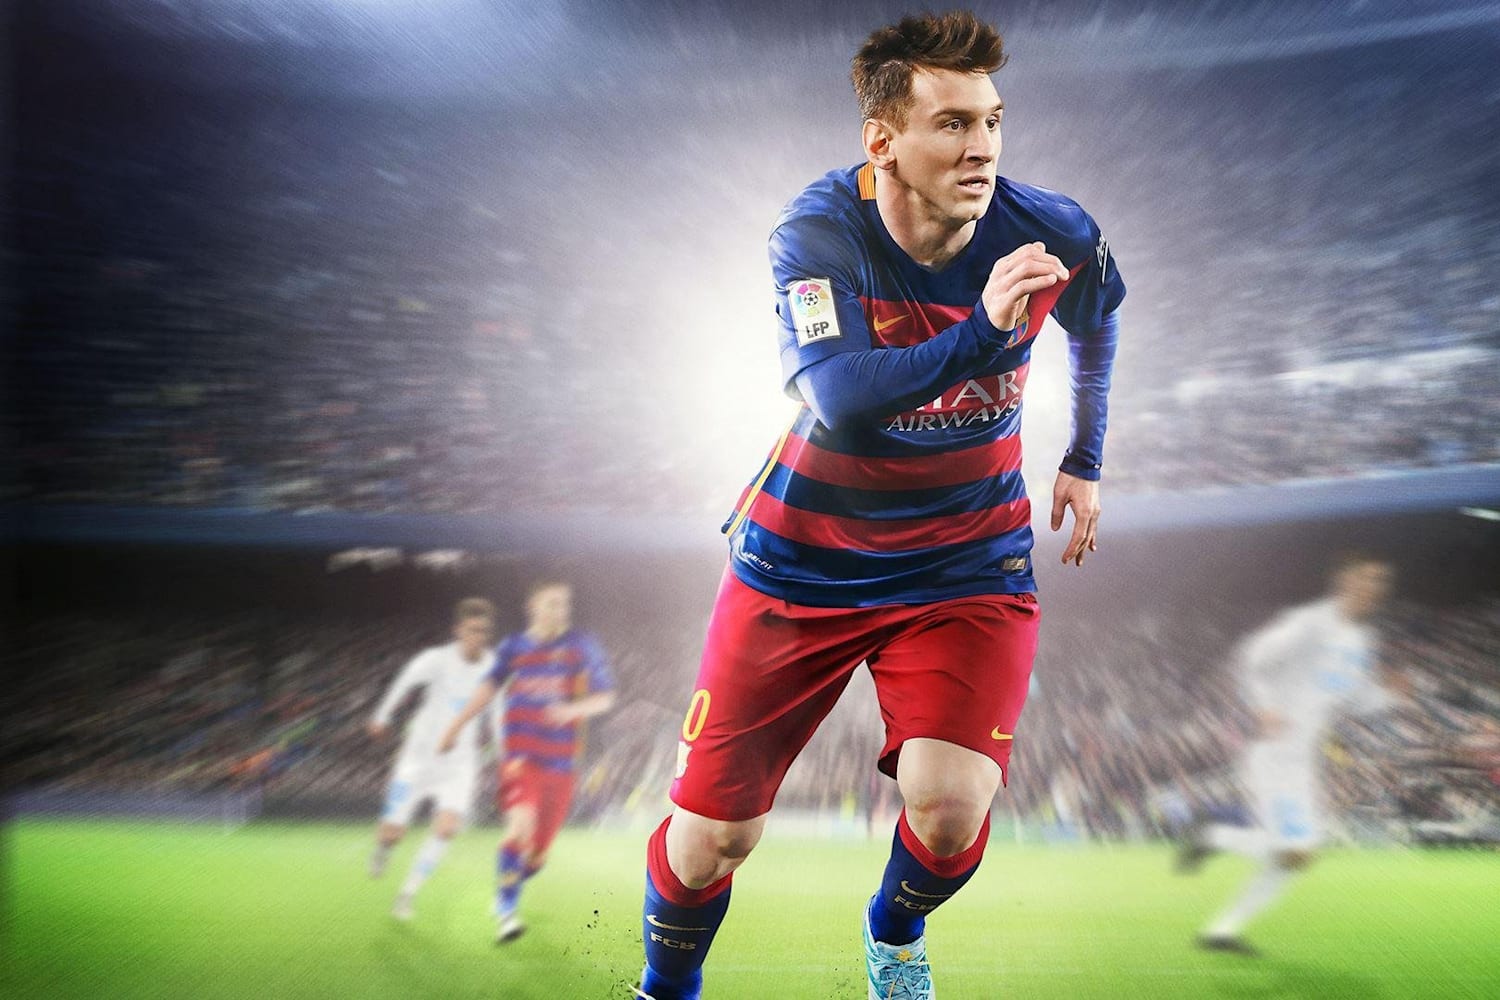 FIFA 16 tips: How to play as Messi | Red Bull Games